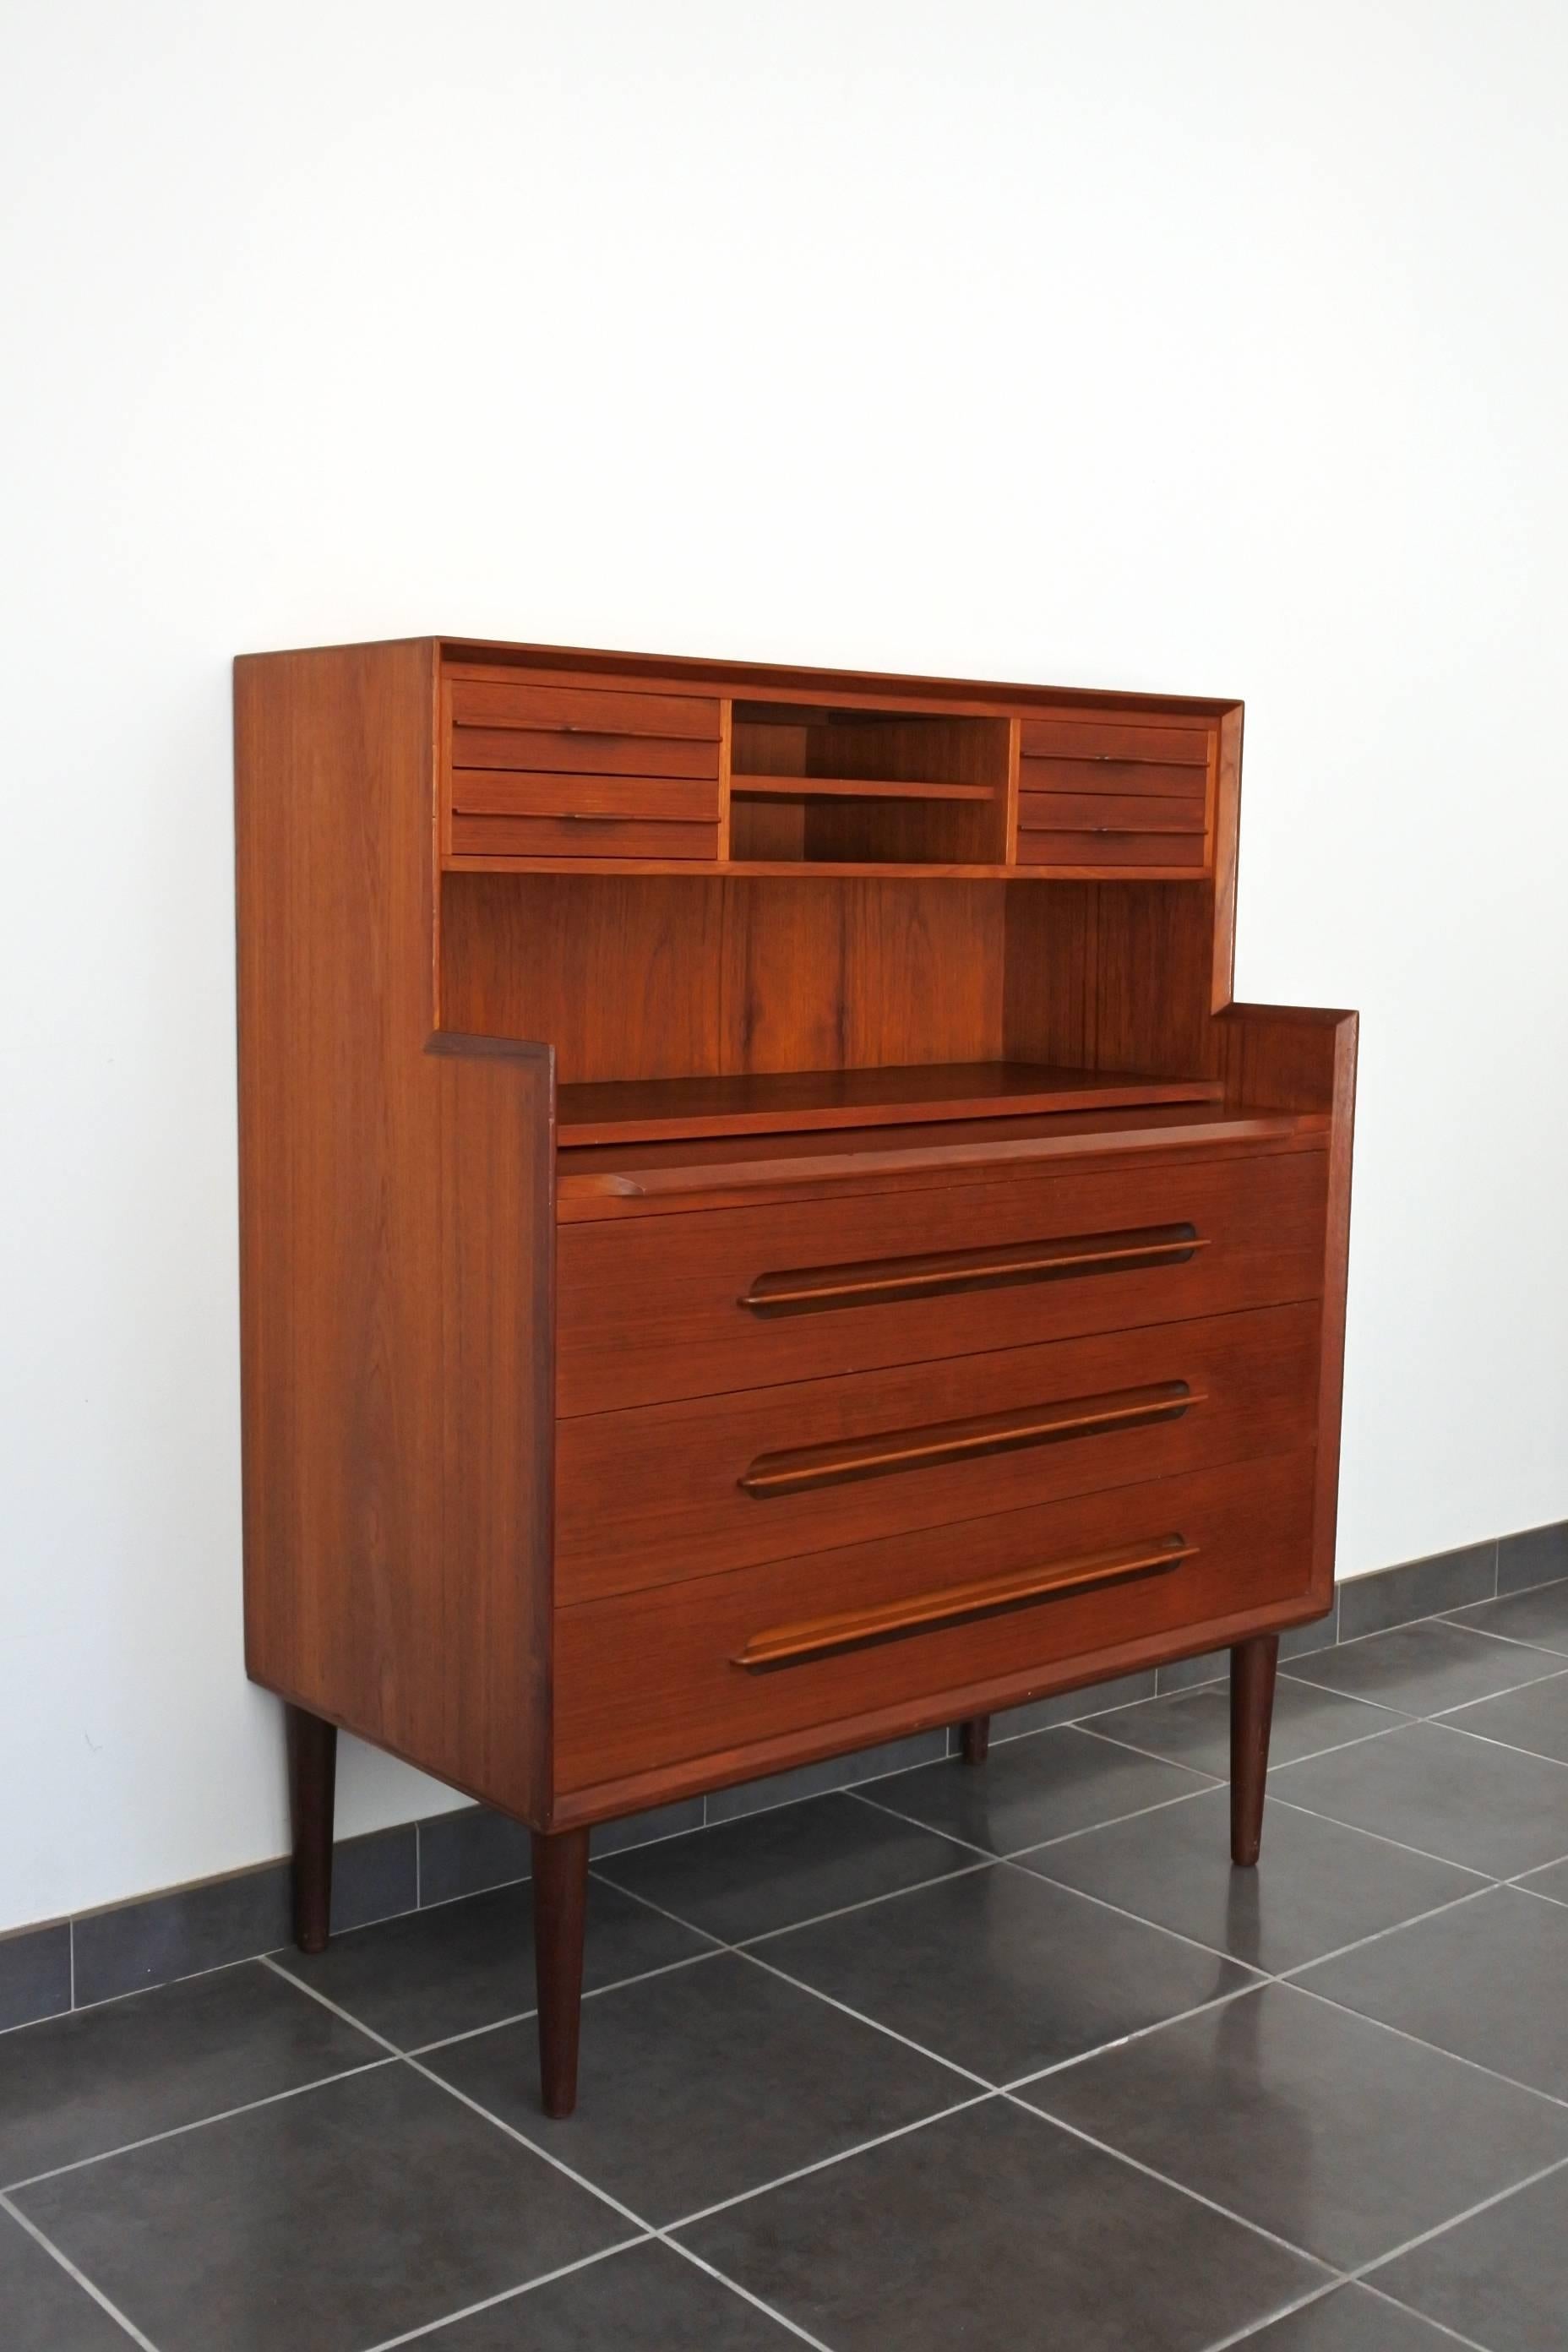 Midcentury secretaire desk and independent shelf by Danish designer Ejvind A. Johansson.
Manufactured by Gern Mobelfabrik Denmark,
circa 1950
Solid teak wood and teak veneer.
All the drawers are dovetailed.
Stamped in the back by the